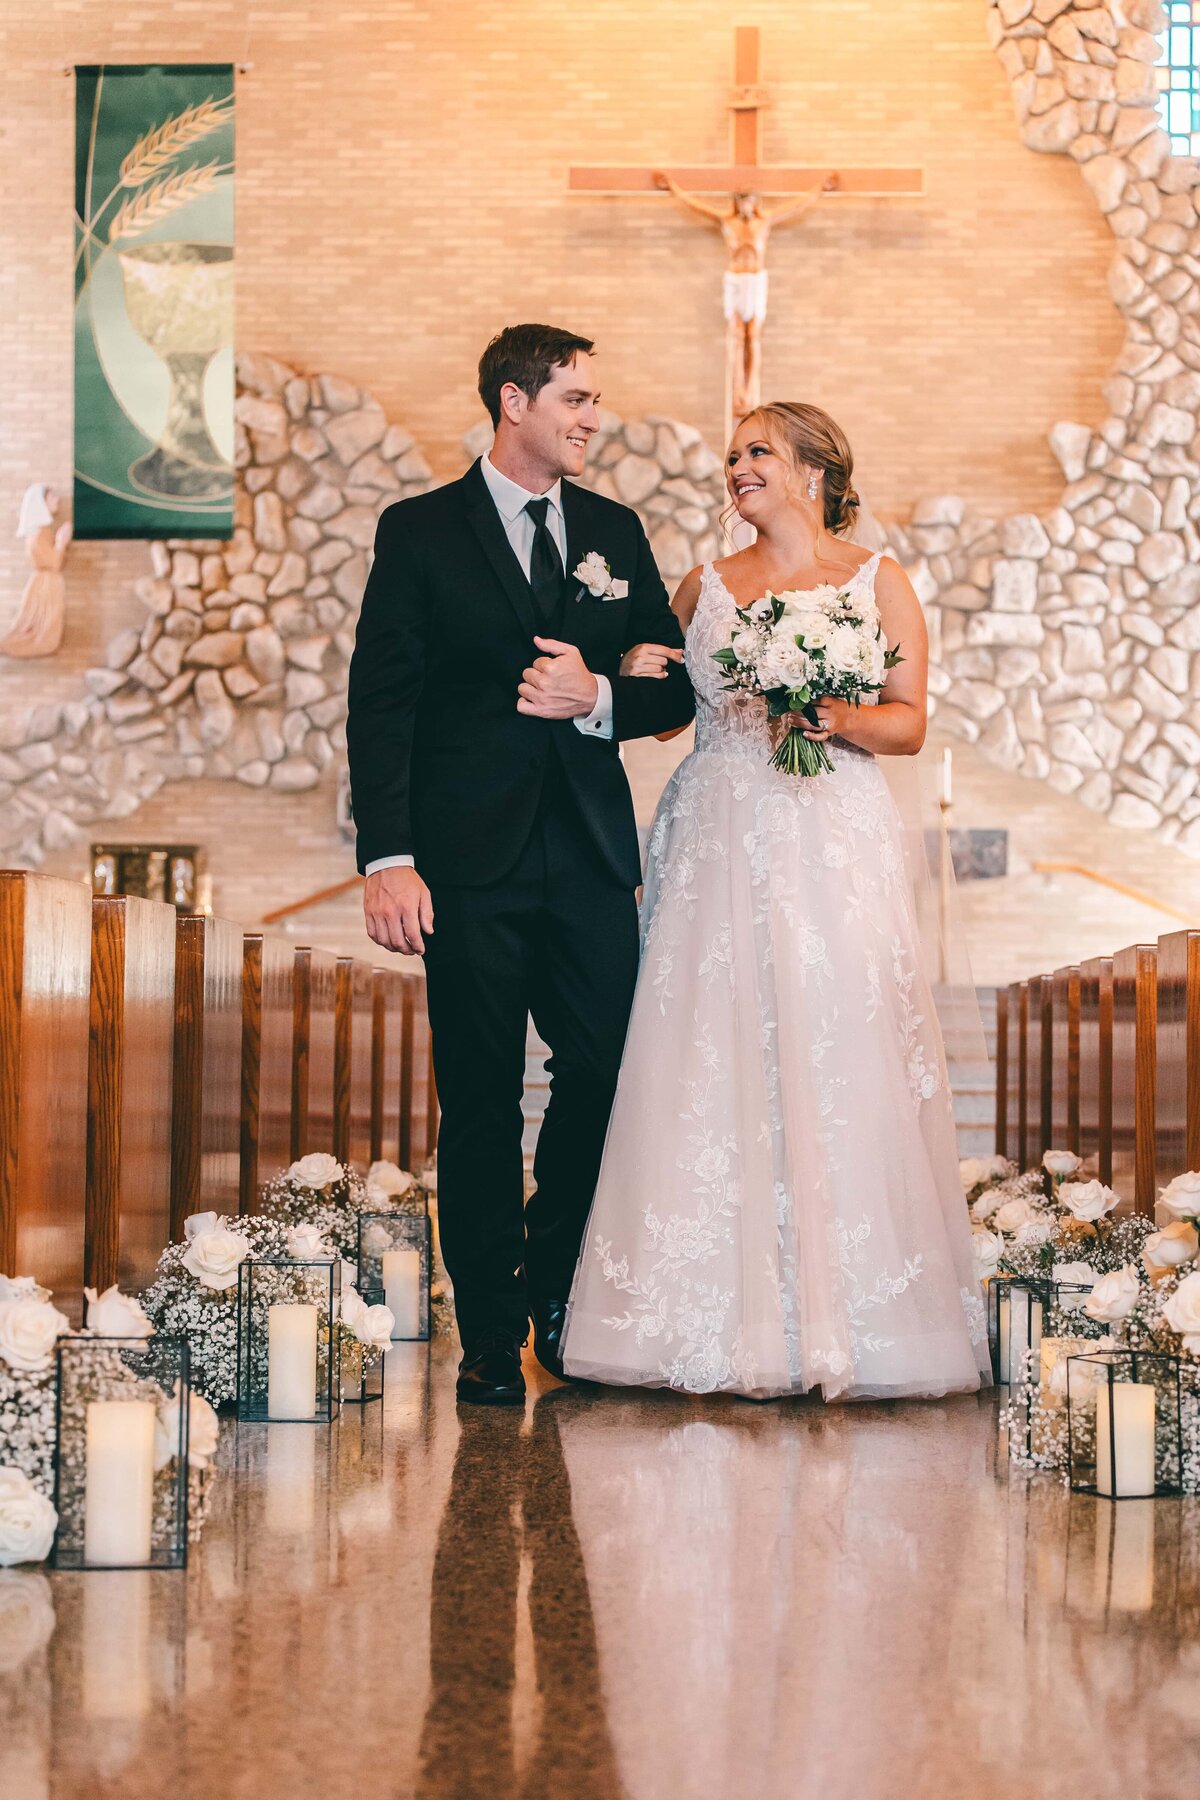 Bride and groom laughing together while walking down the aisle in a church adorned with candles and a cross, as organized by a wedding coordinator in Iowa.